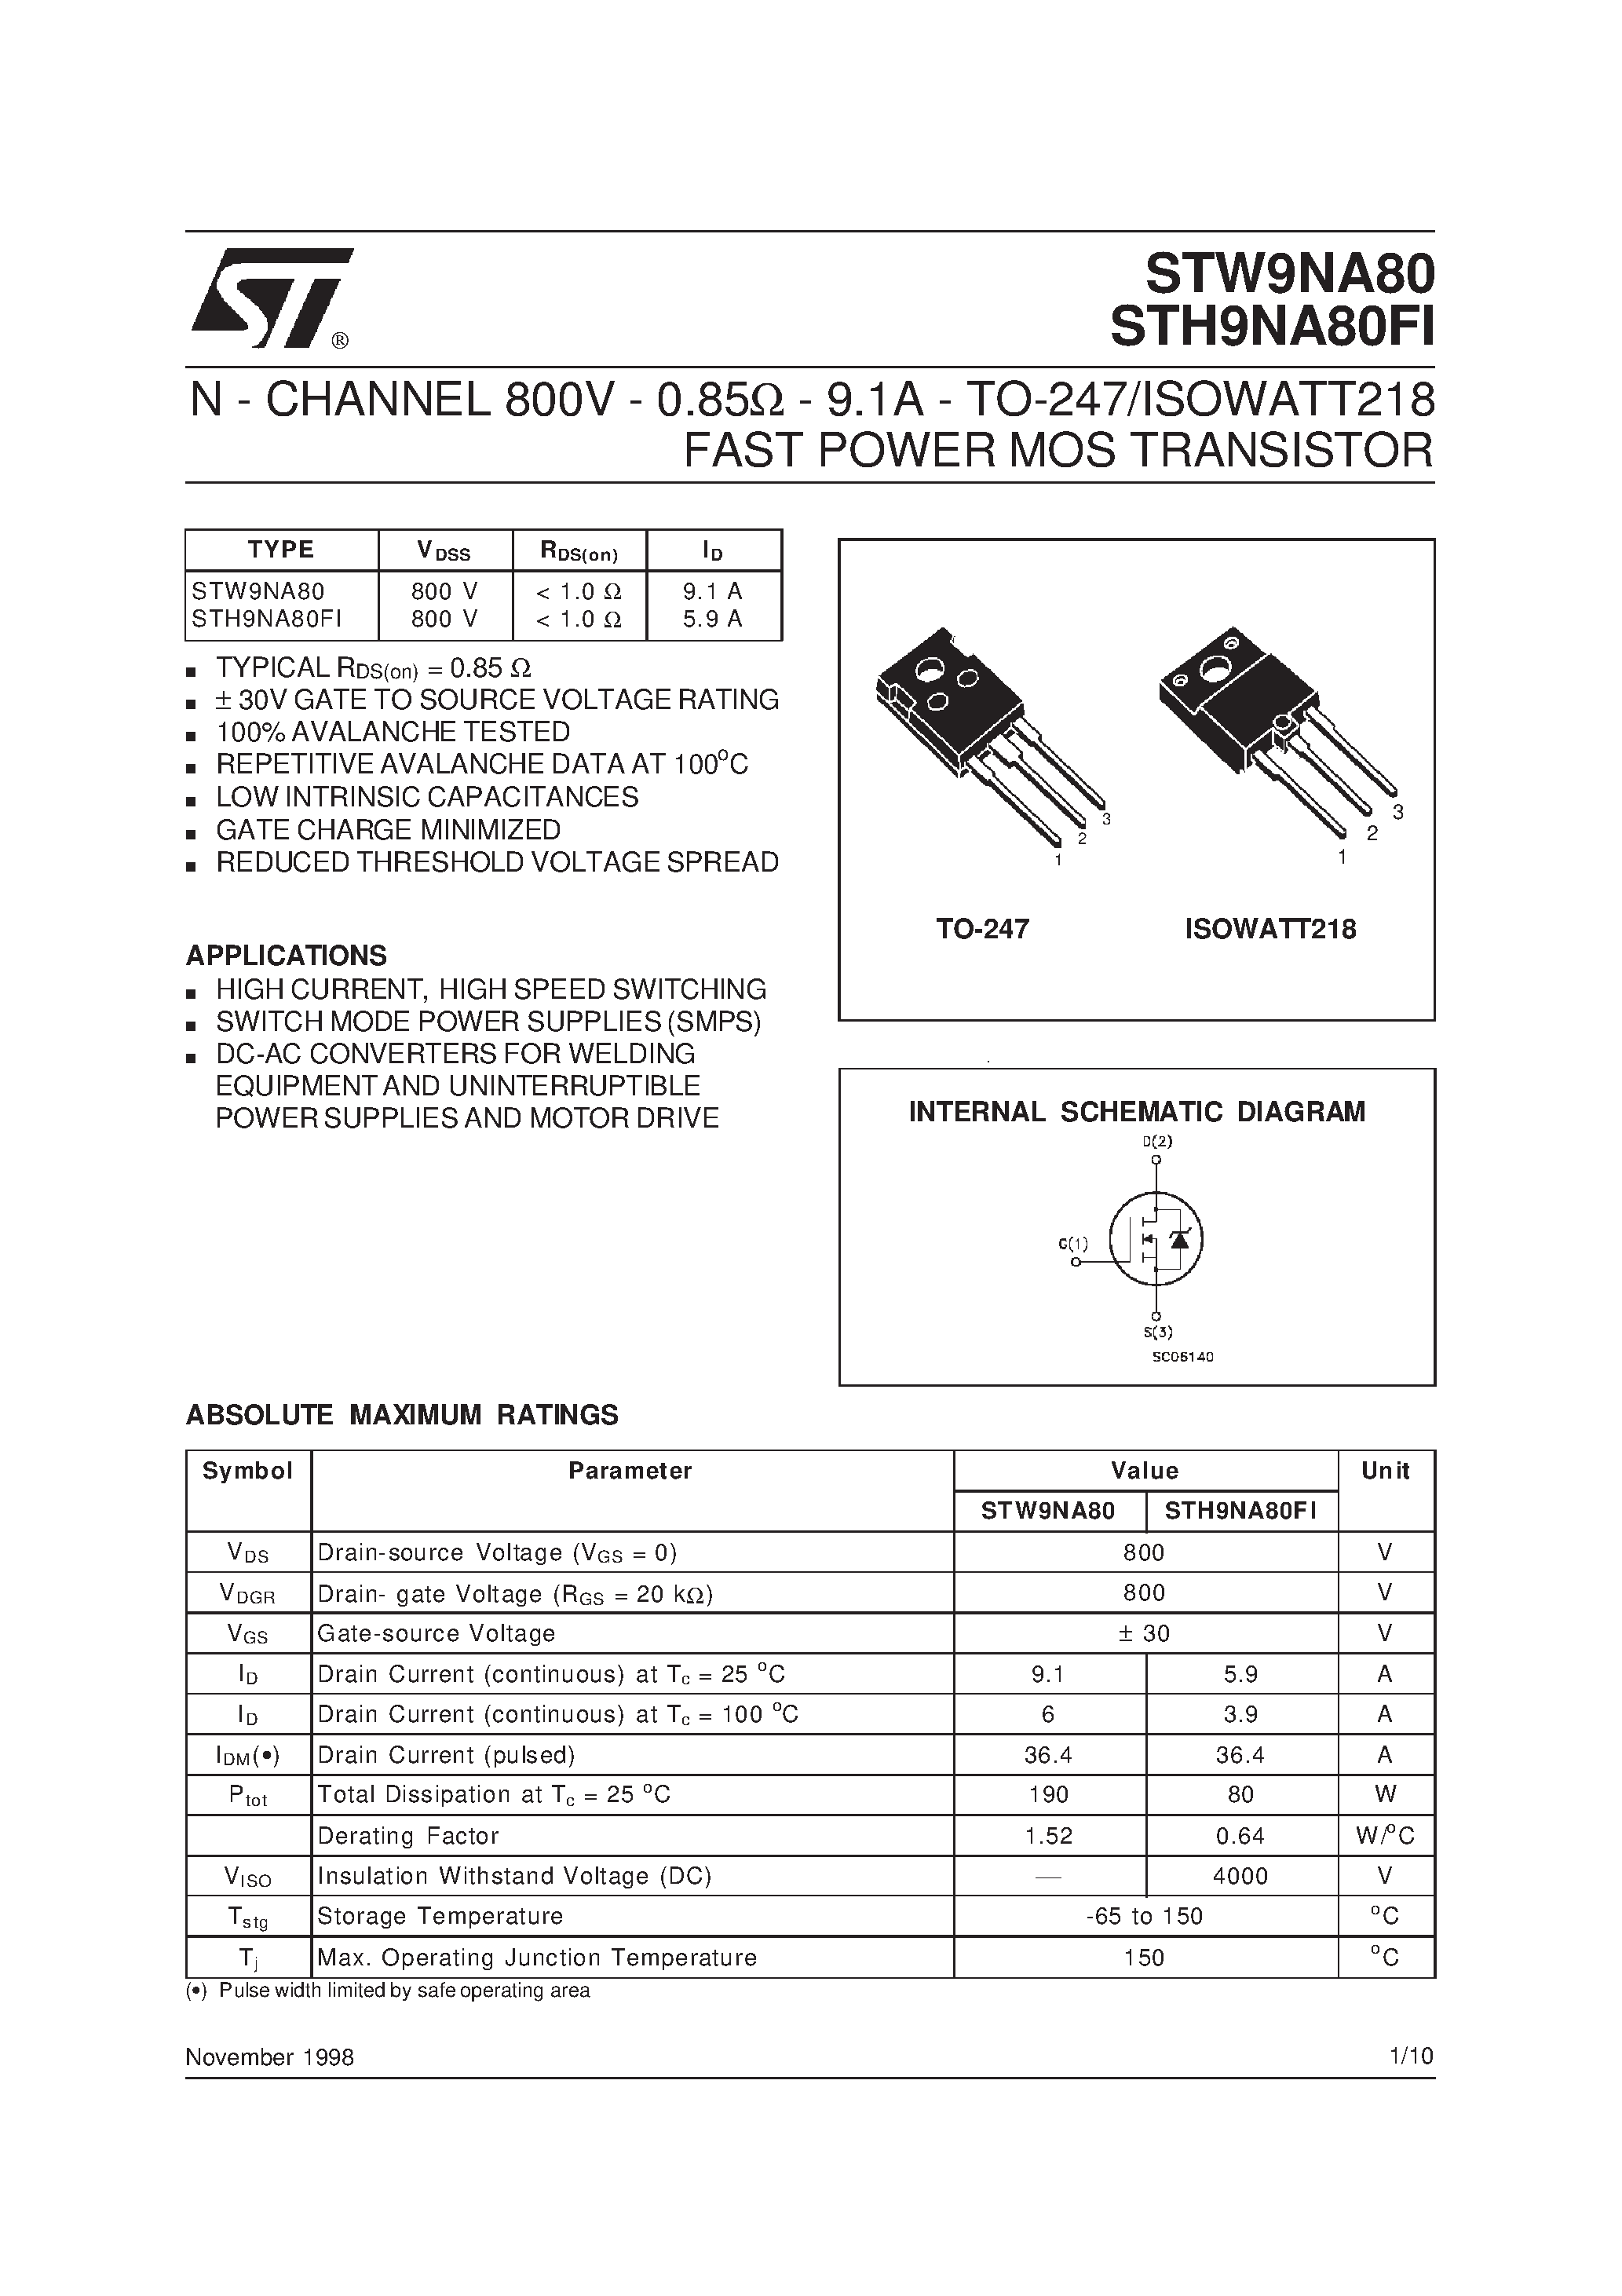 Даташит STW9NA80 - N - CHANNEL 800V - 0.85ohm - 9.1A - TO-247/ISOWATT218 FAST POWER MOS TRANSISTOR страница 1